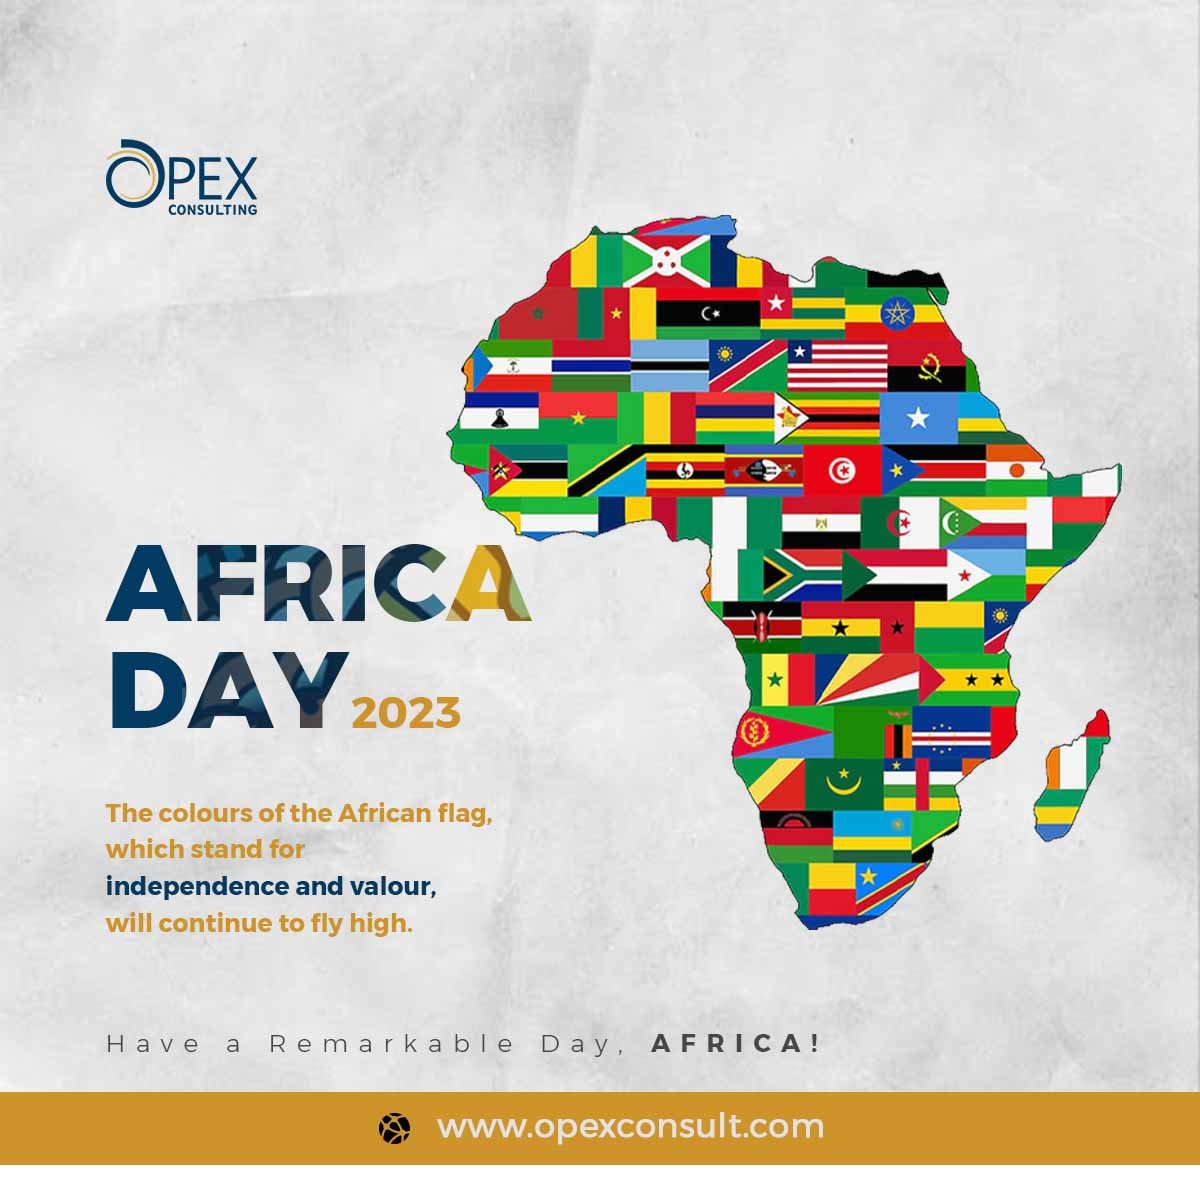 Wishes from Opex Consulting...
#African #Africa #AfricaDay2023 #AfricaMonth #Nigeria